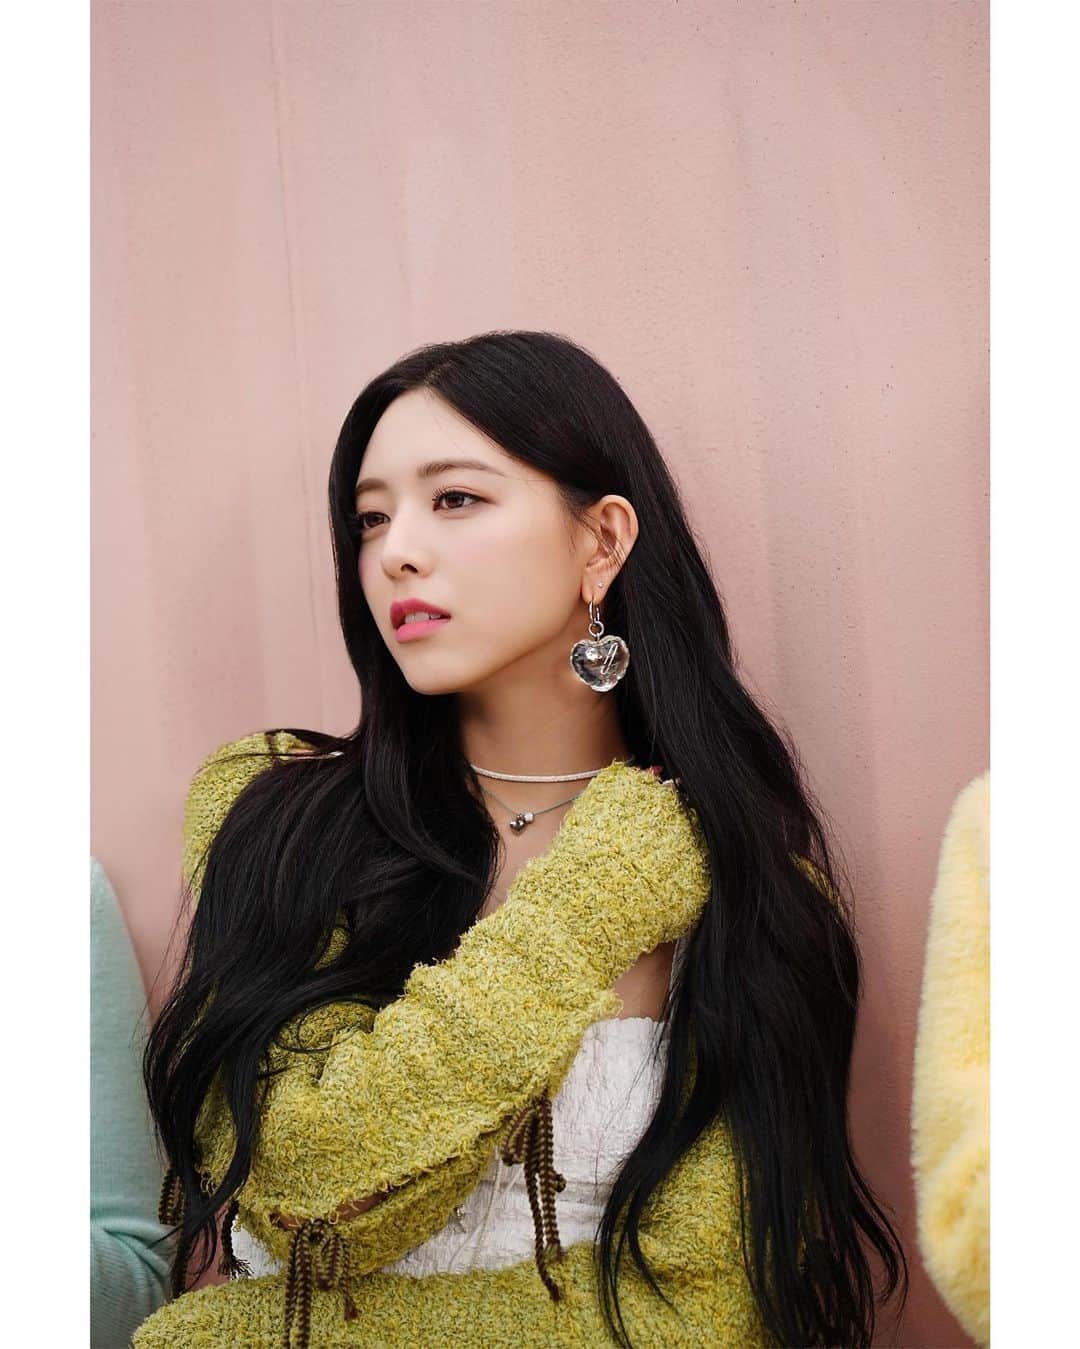 ITZYのインスタグラム：「. ITZY JAPAN 1st Album『RINGO』 Out Now  「Sugar-holic」Behind Photo📸 #YUNA  #ITZY #RINGO #ITZY_RINGO #Sugarholic」